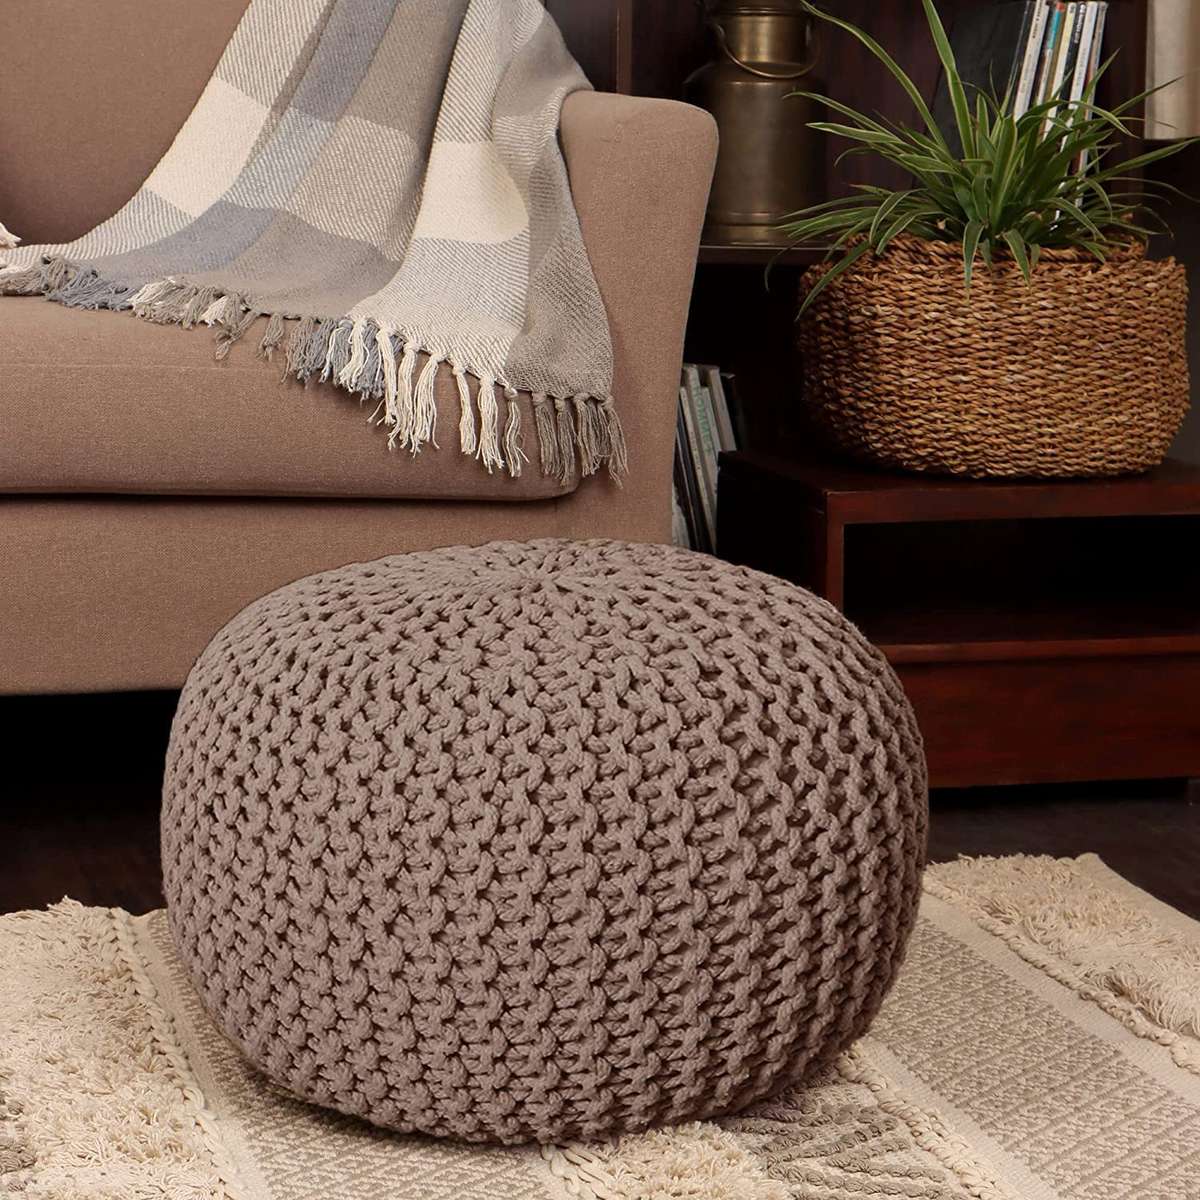 REDEARTH Round Pouf Foot Stool Ottoman -Hand Knitted Bean Bag, Cord Boho Pouffe, Cable Poof Accent Beanbag Chair Footrest for Living Room, Bedroom